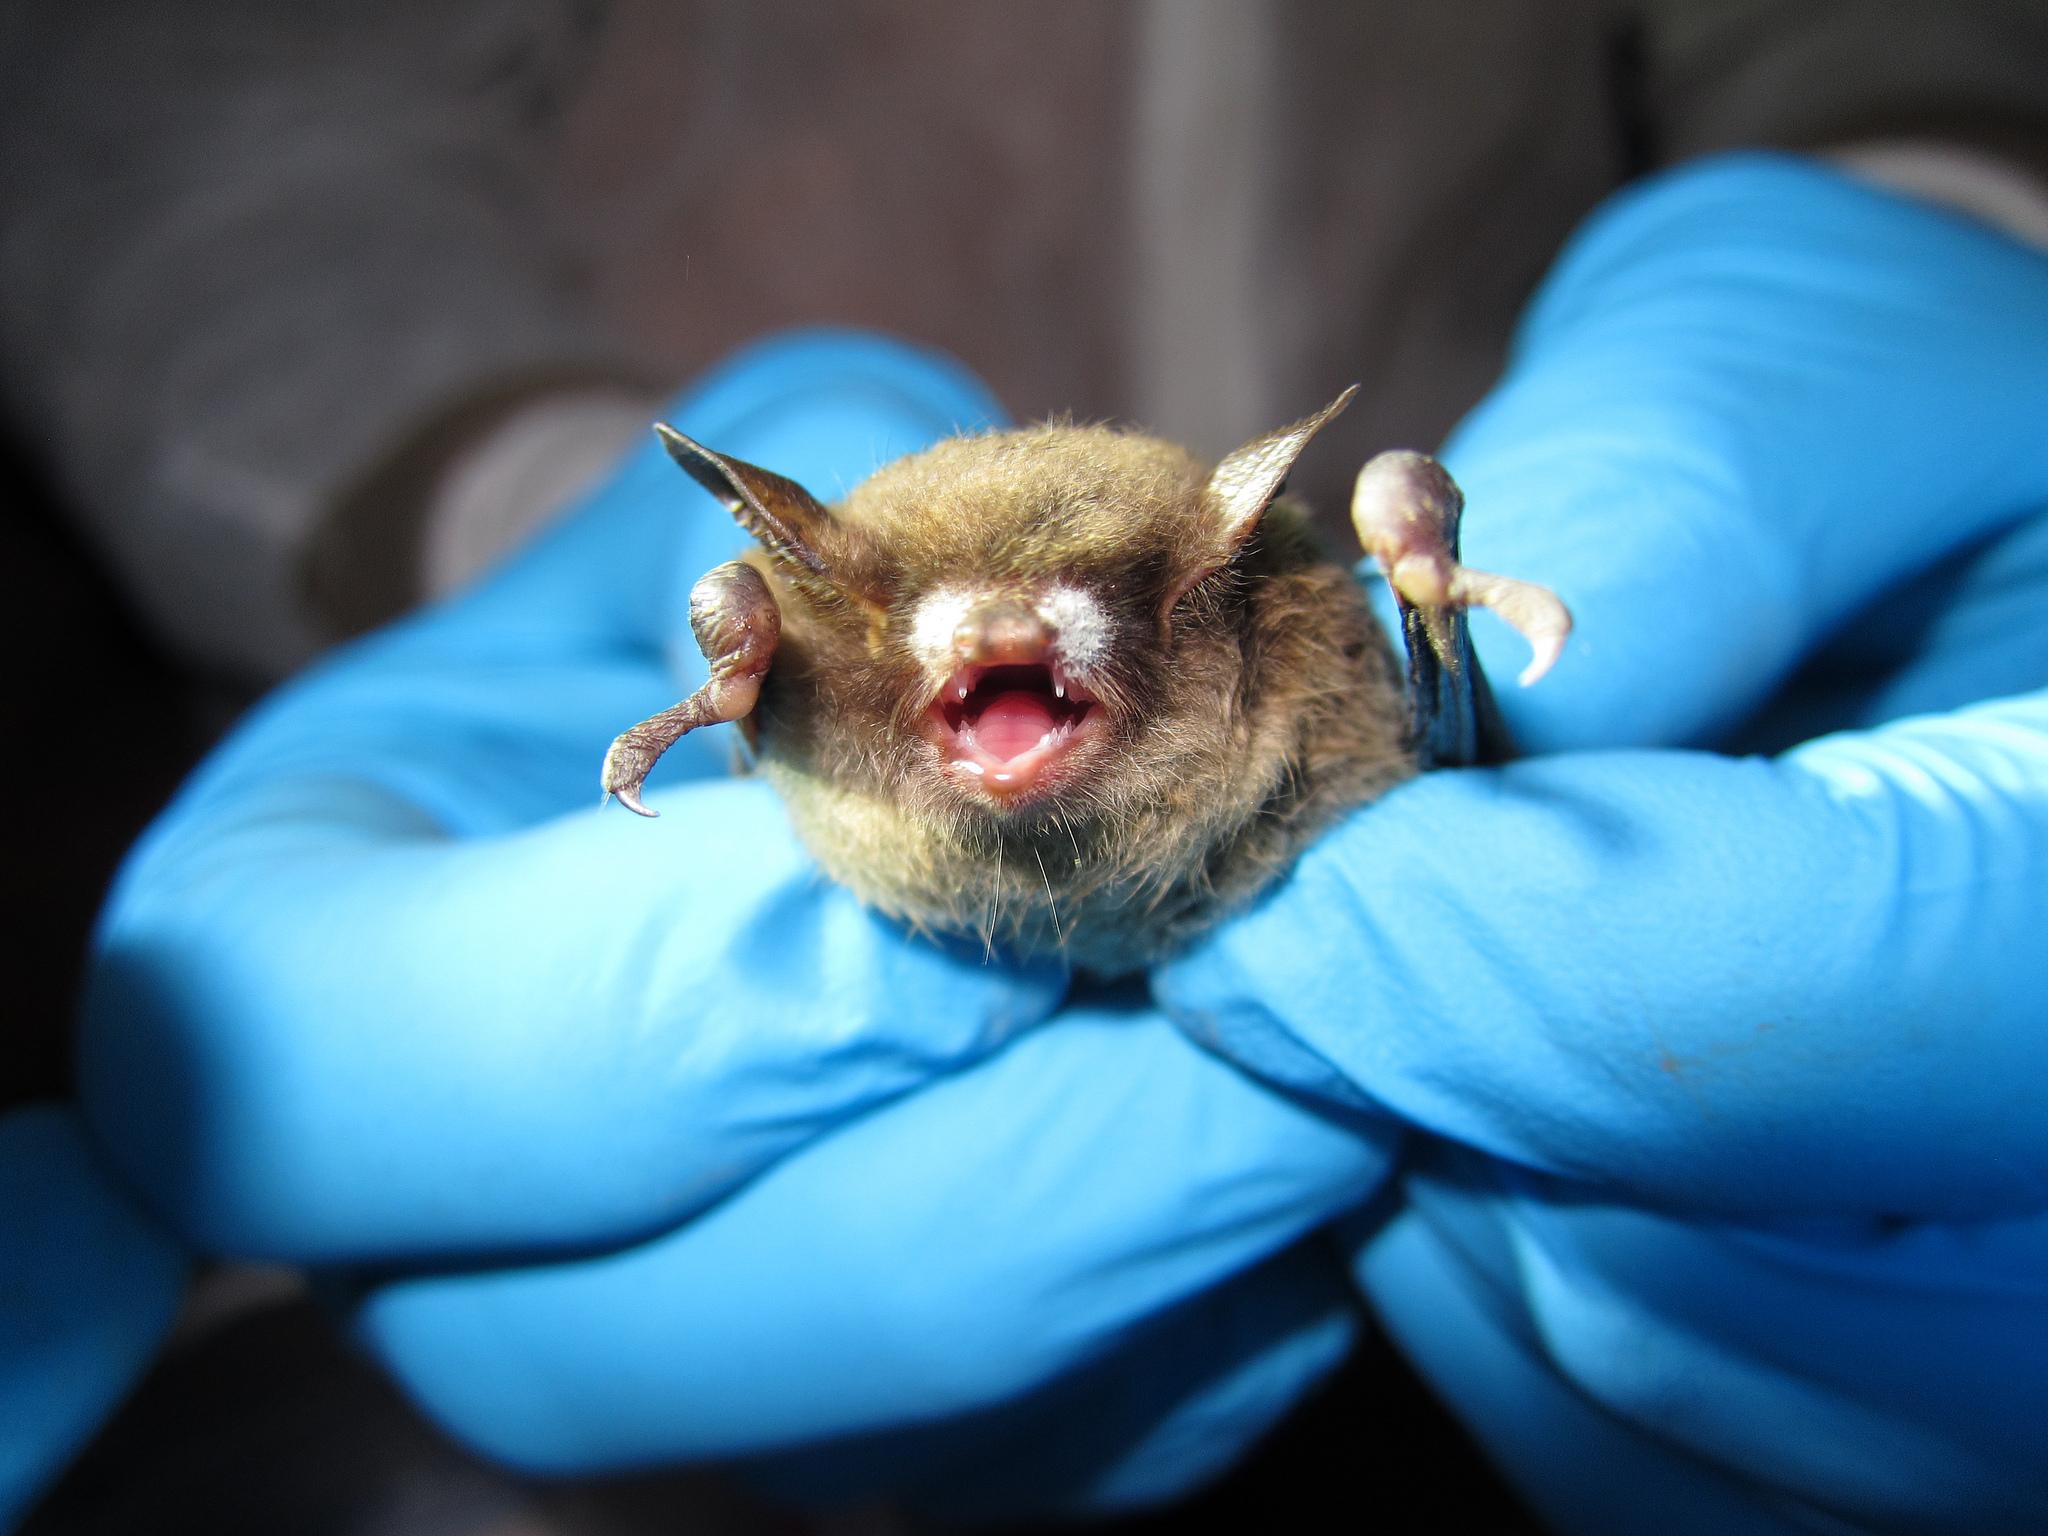 In this photo by Steve Taylor of the University of Illinois, a little brown bat shows visible symptoms of White-nose syndrome. (U.S. Fish and Wildlife Service / Flickr)